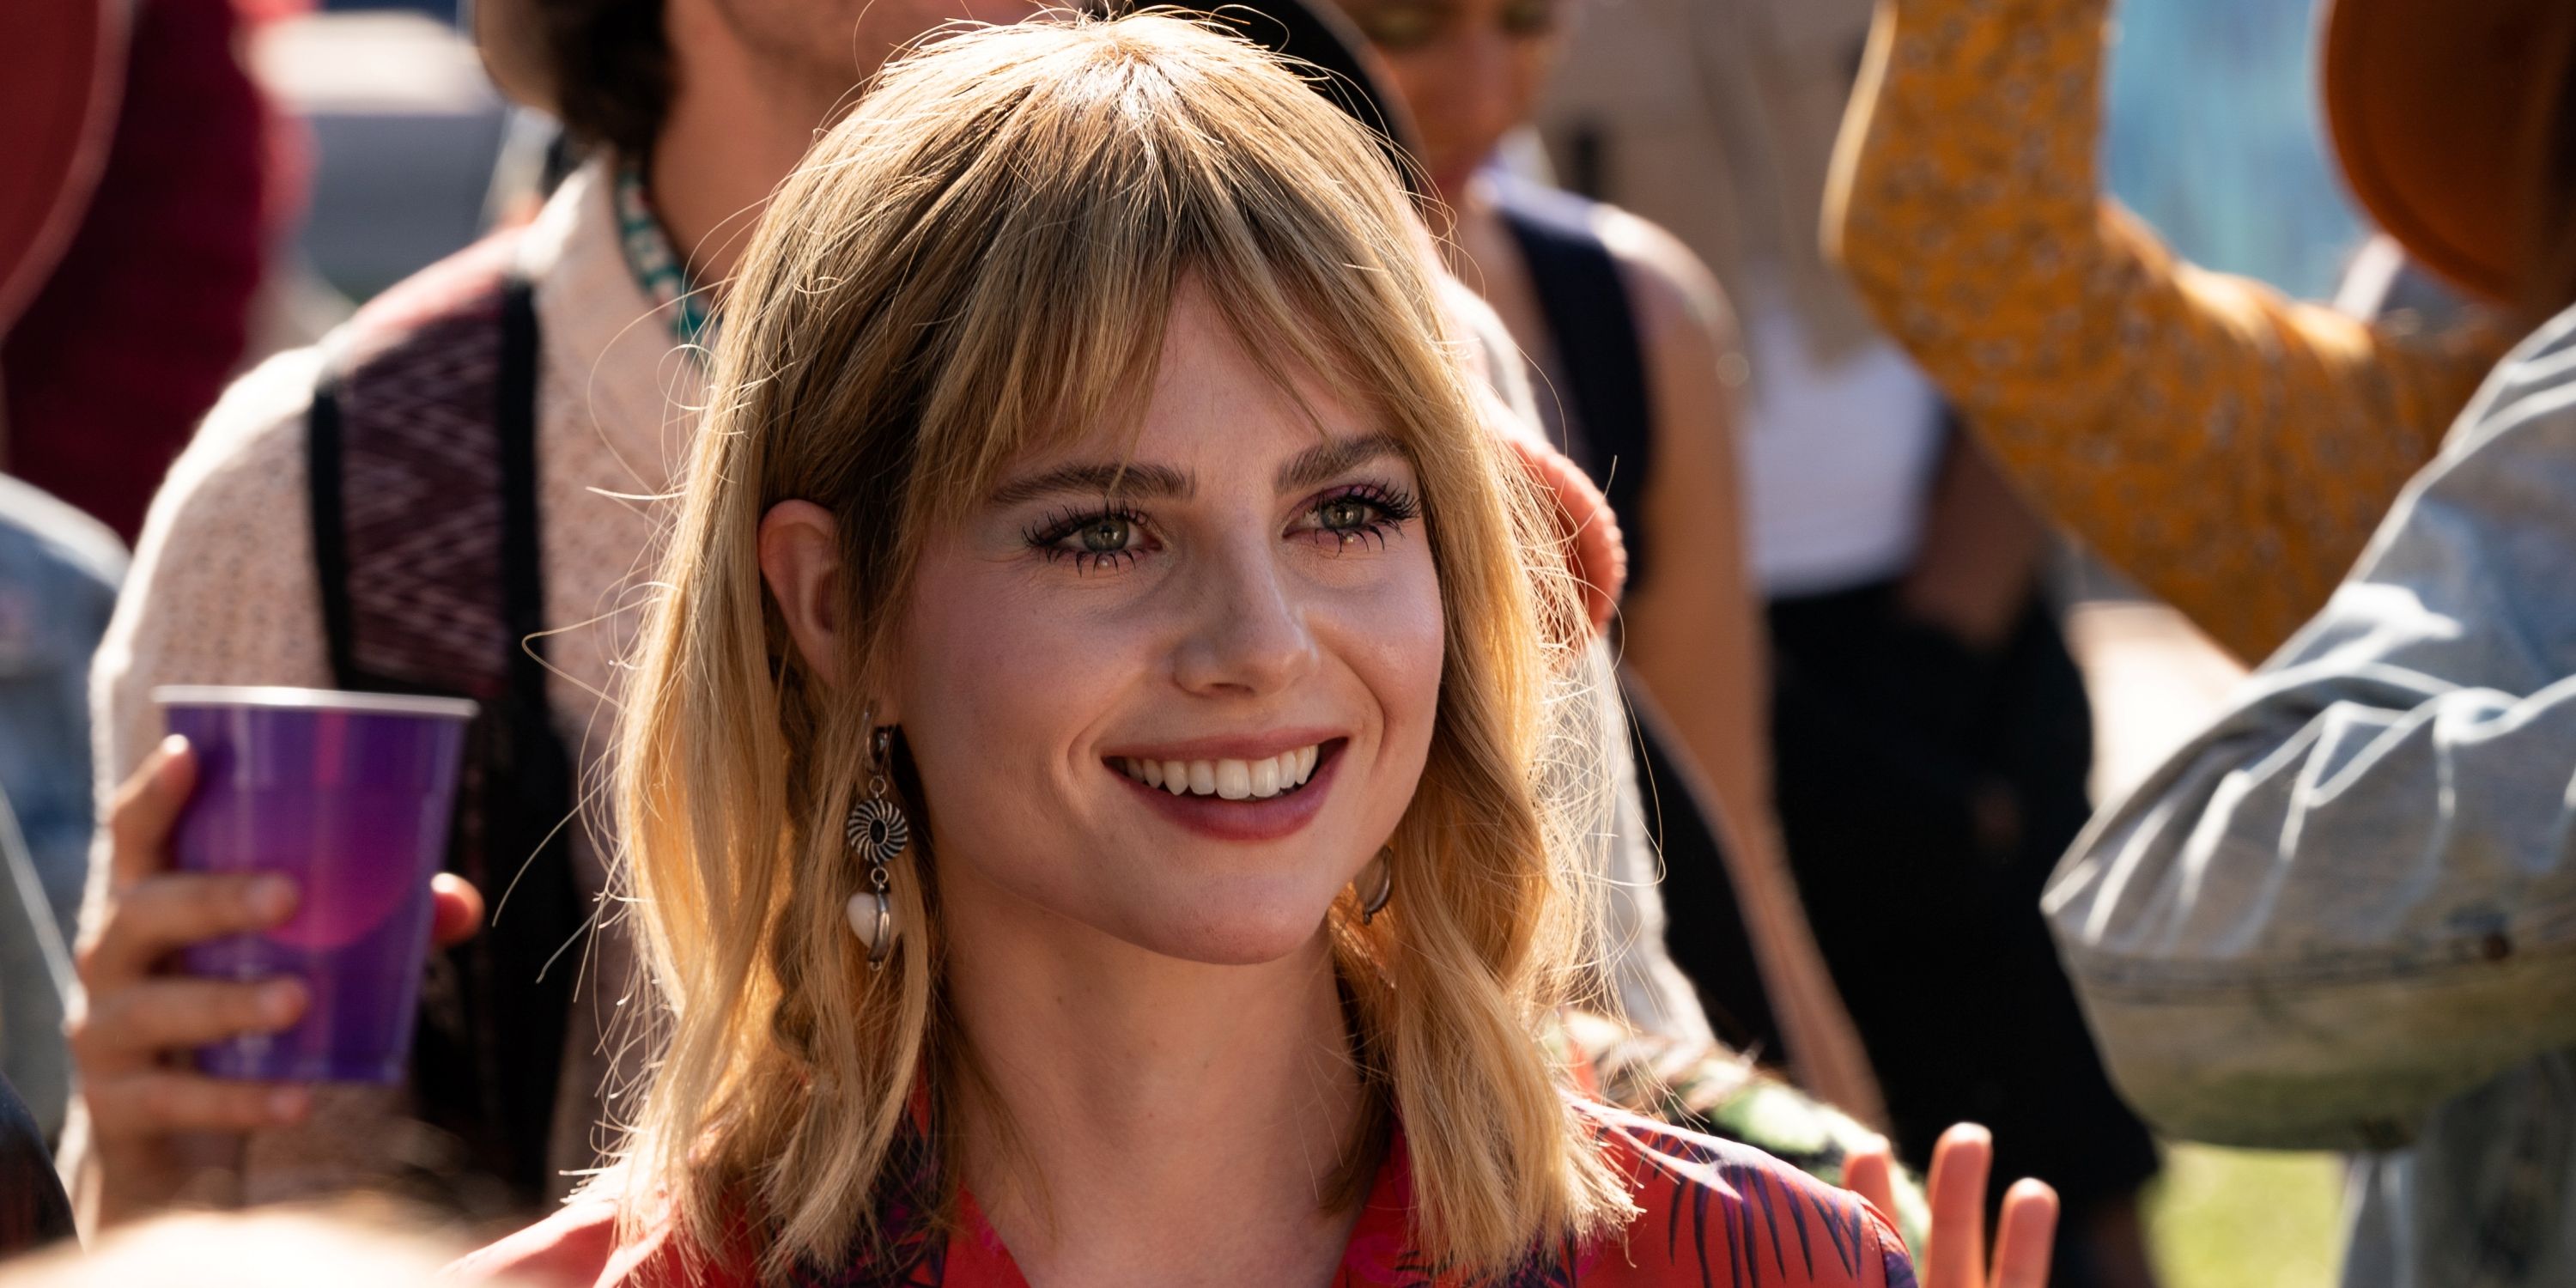 Lucy Boynton as Harriet in closeup while smiling in The Greatest Hits